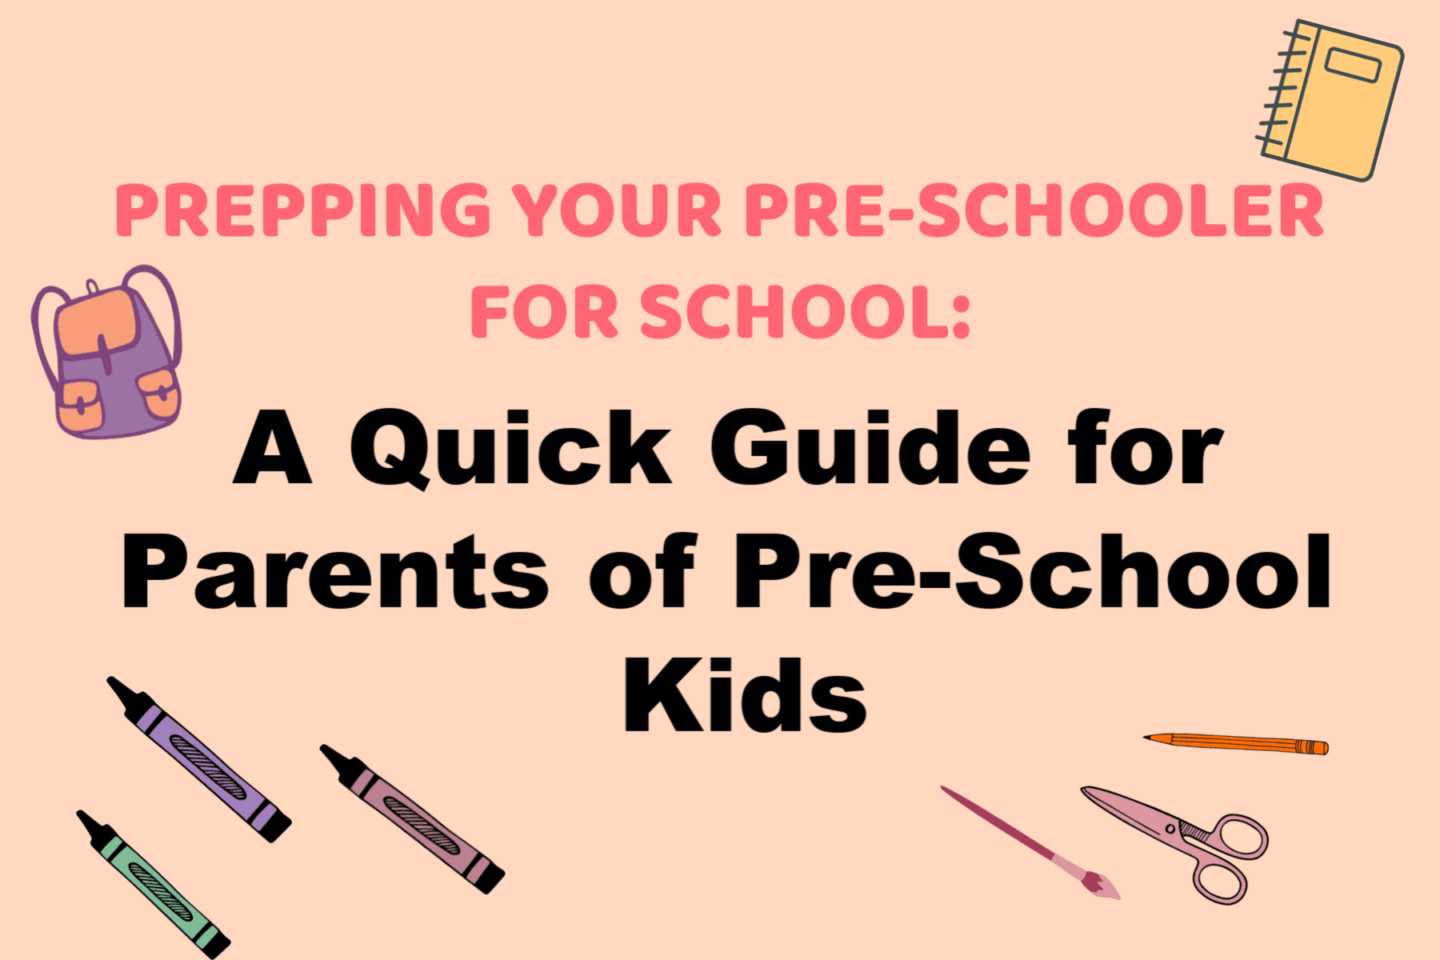 Prepping Your Pre-Schooler for School: A Quick Guide for Parents of Pre-School Kids